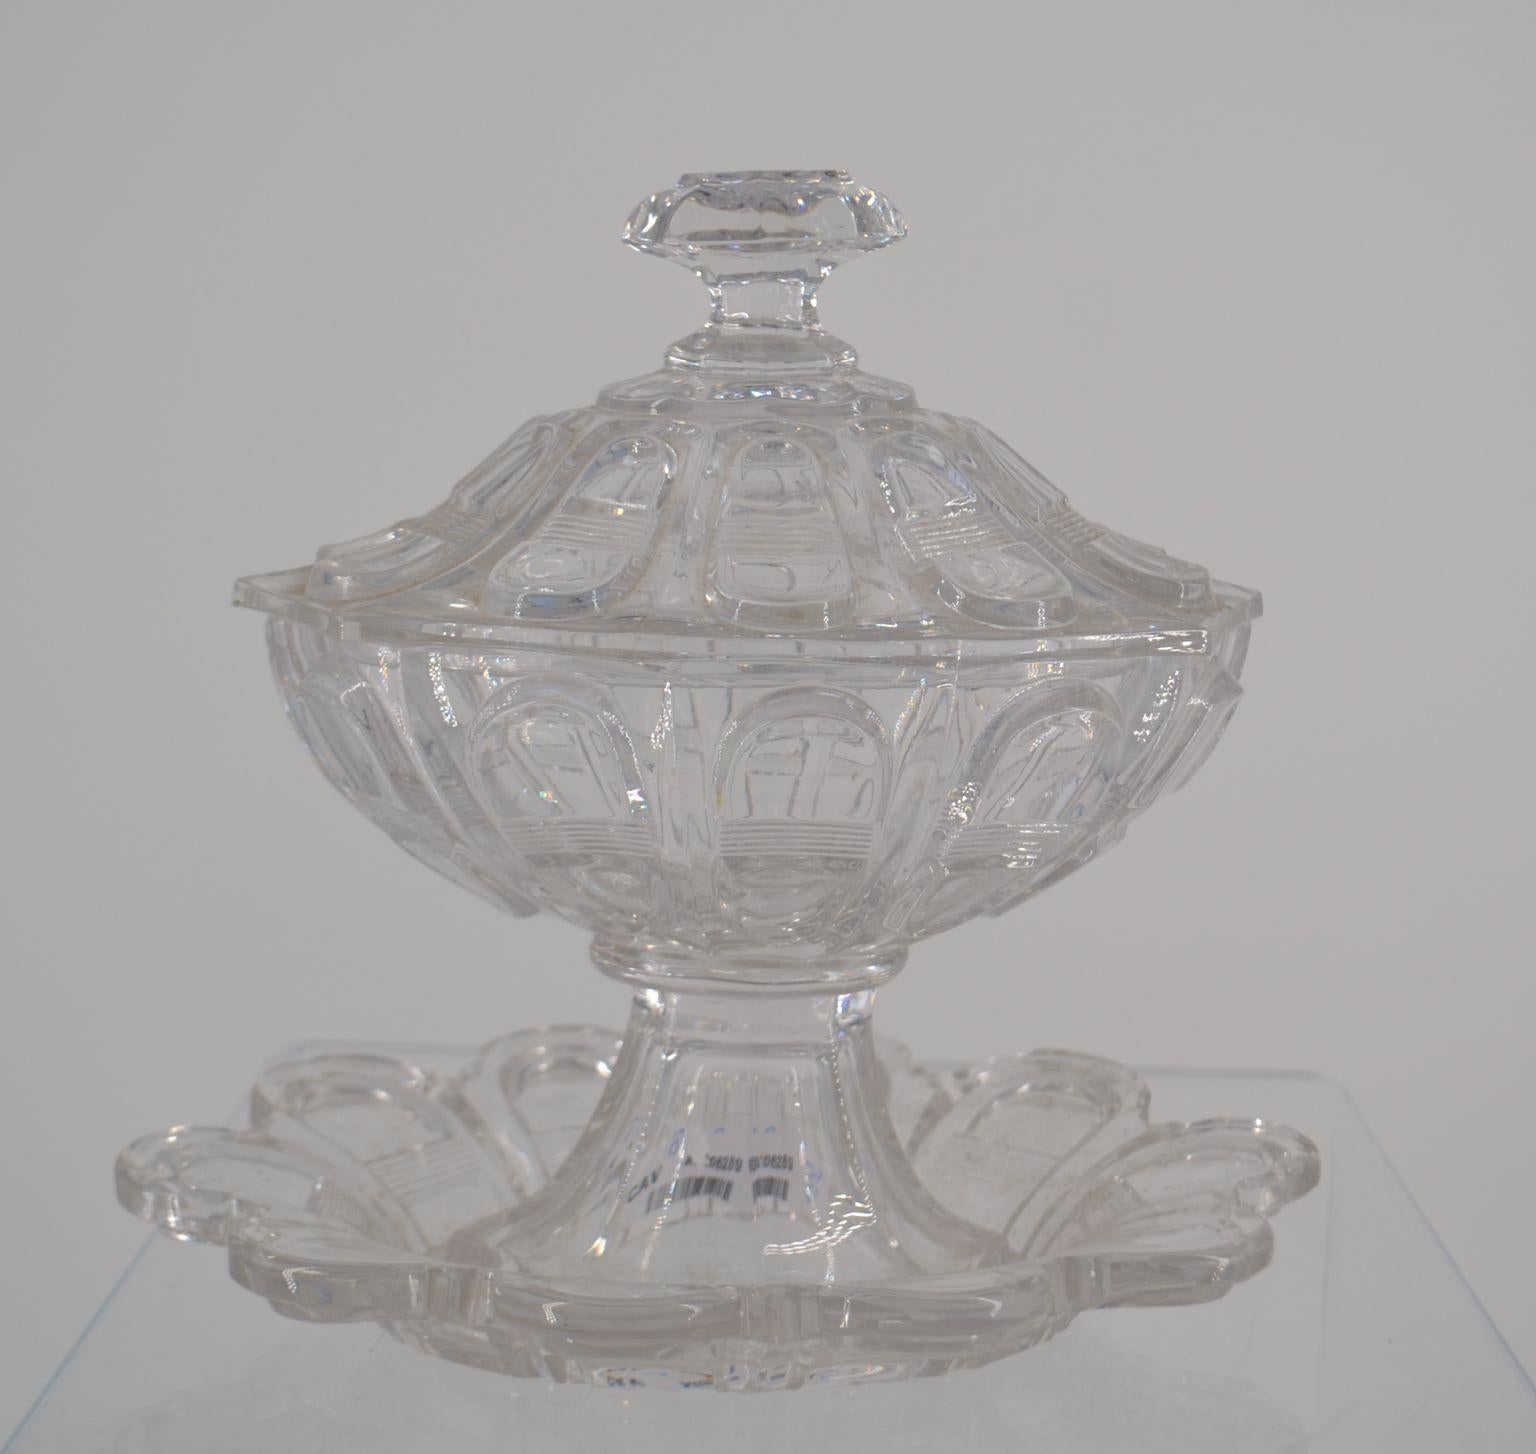 Crystal marmalade server In Good Condition For Sale In Vista, CA